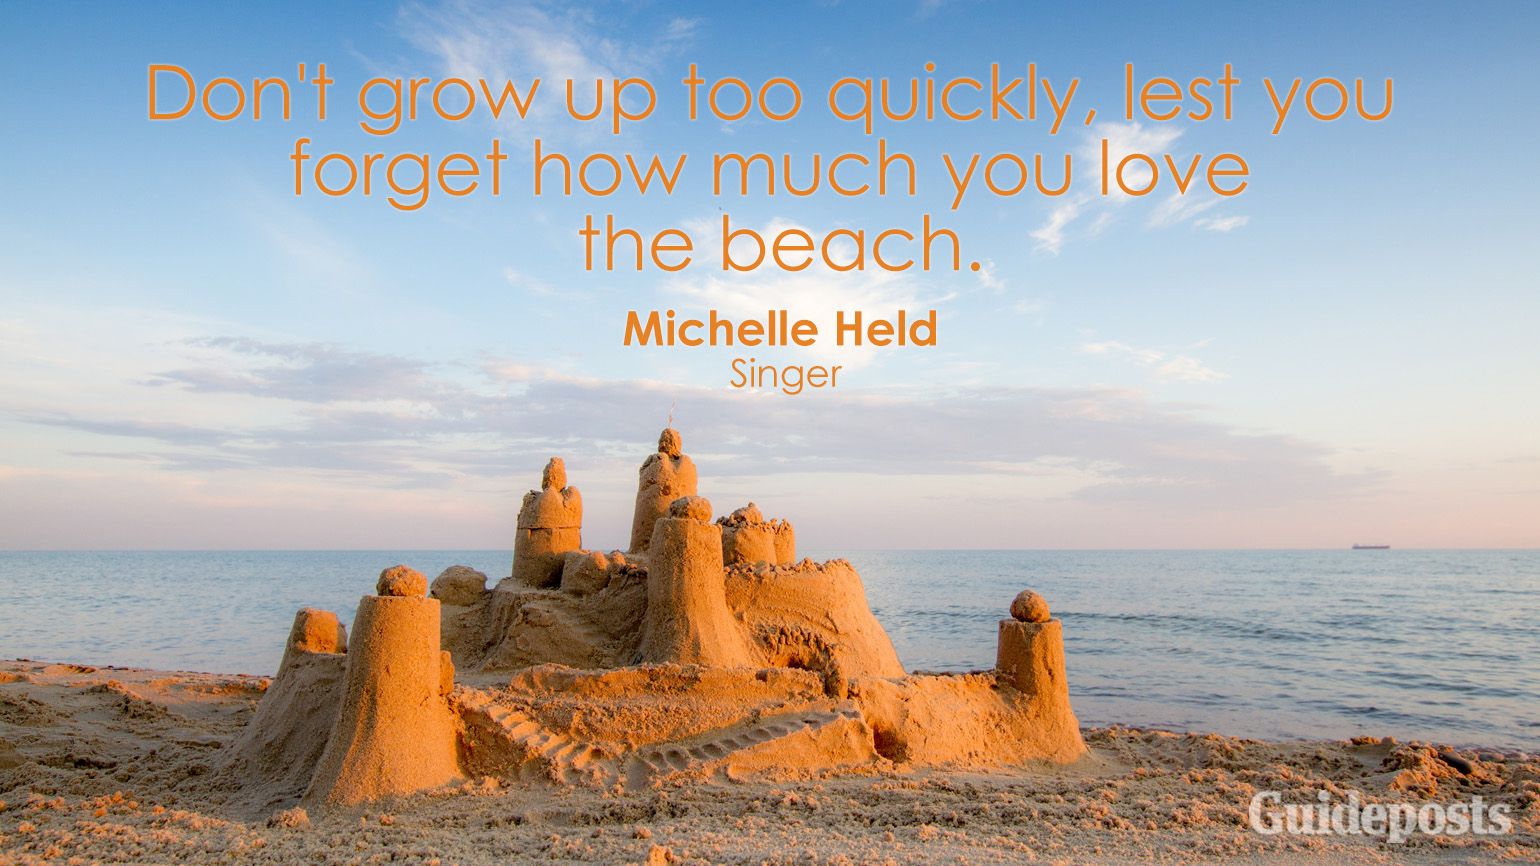 Don't grow up too quickly, lest you forget how much you love the beach. Michelle Held